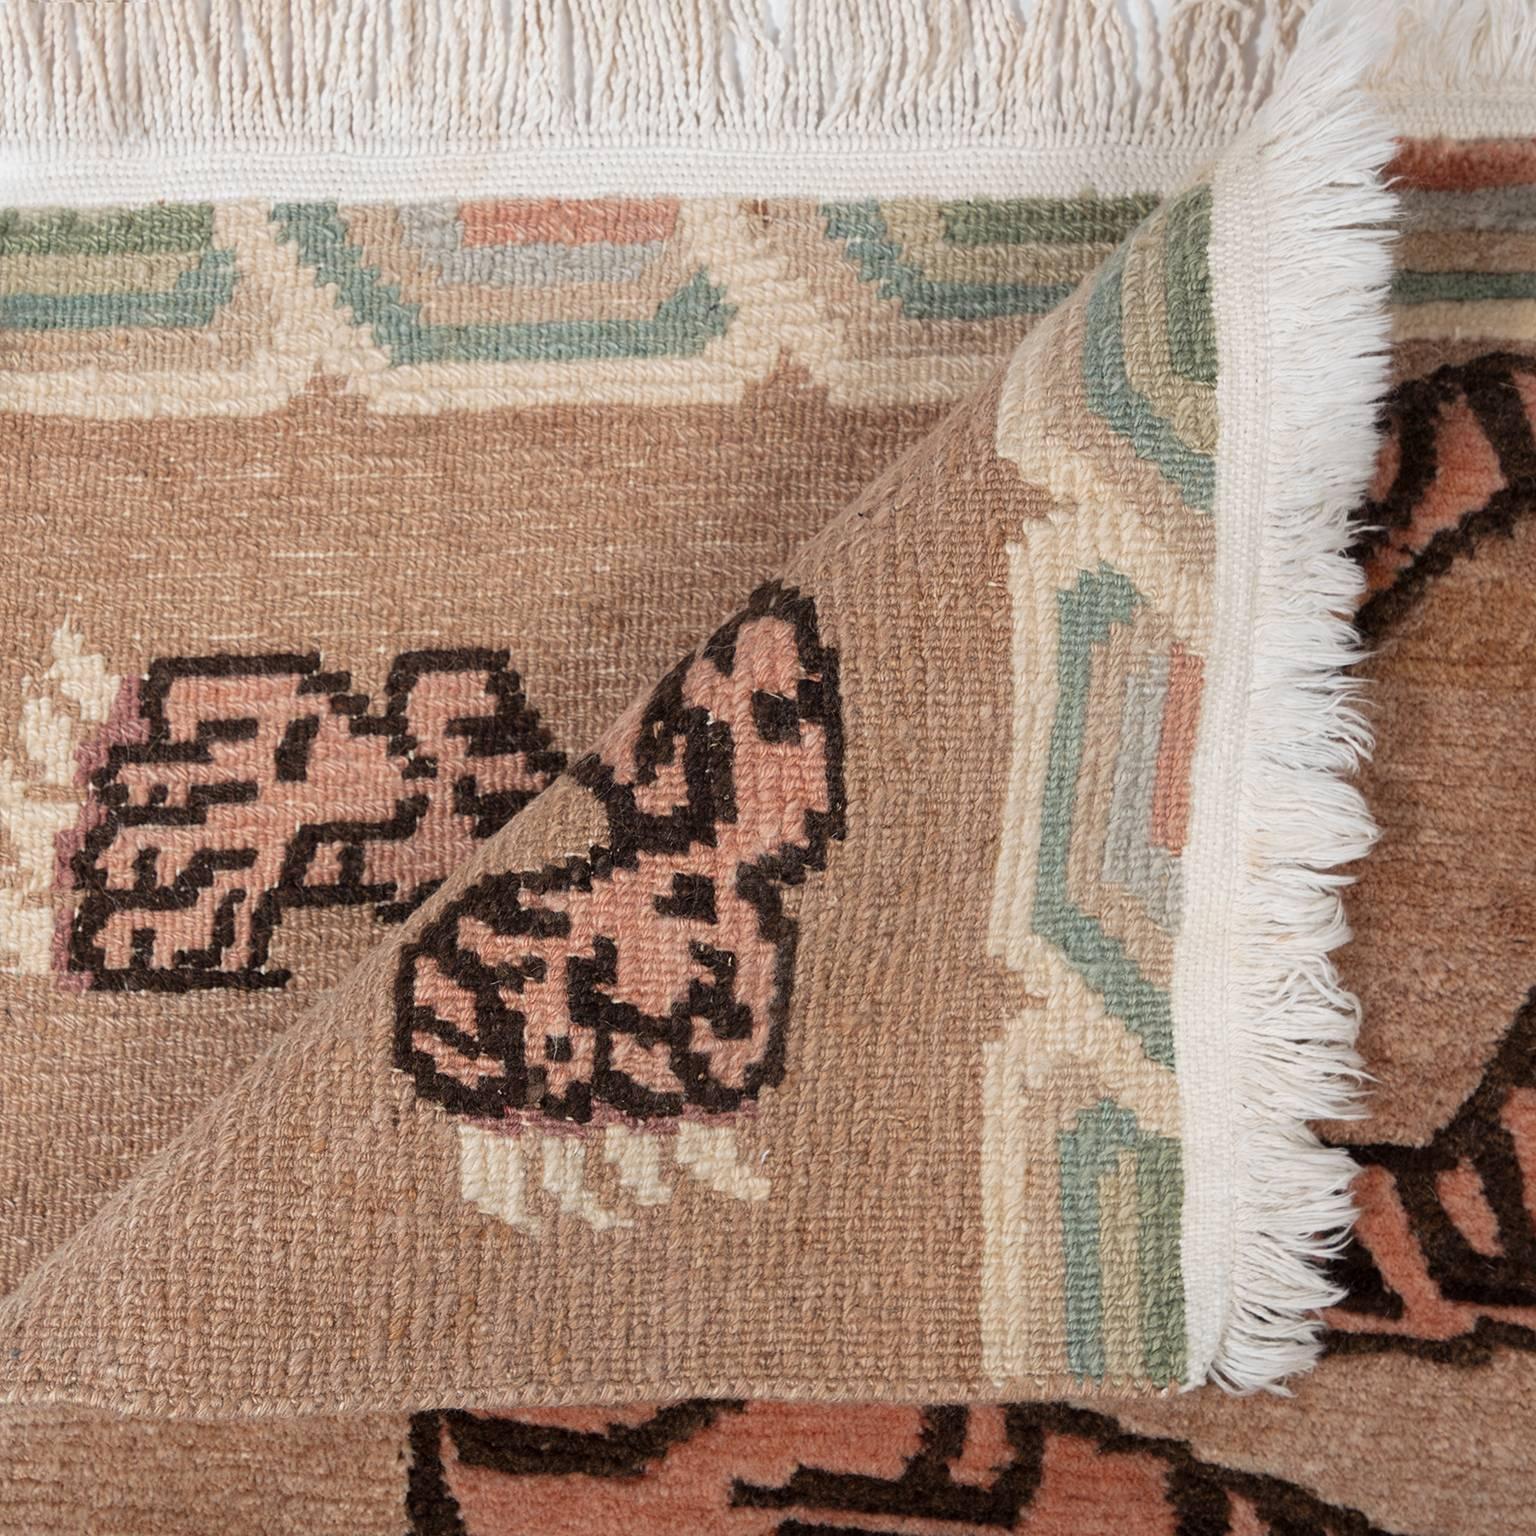 In a palette of pinks, creams and pale greens, this vintage Khaden carpet may once have been used by a Buddhist lama. In Tibet, woven rugs depicting stylized tiger skins are used for meditation. Symbolic of the monk’s control over earthly desire,